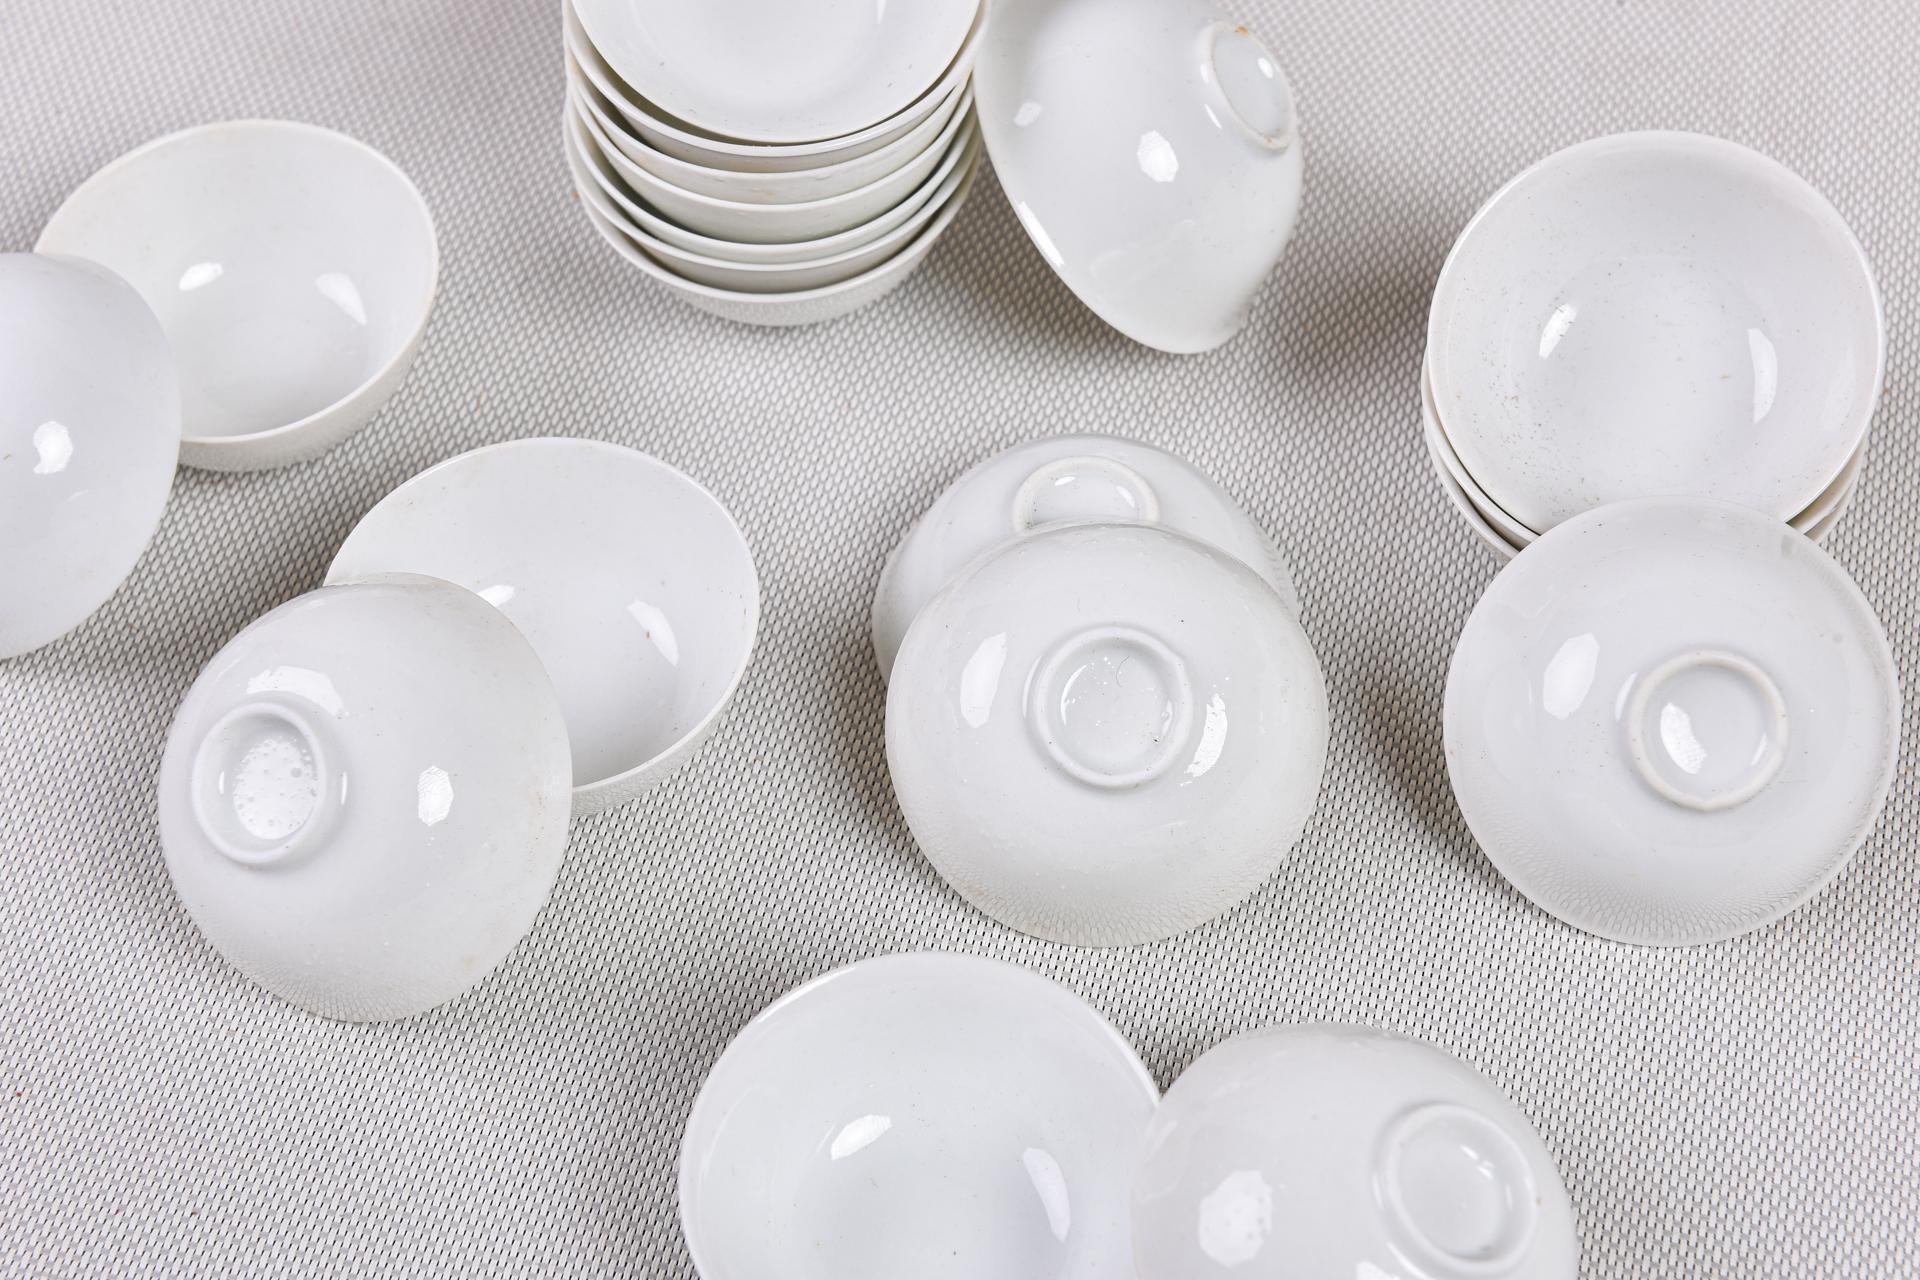 Small bowls in very fine white porcelain: from China or Japan (I don't know) that can be little saucers.
They are 180 ! all perfect. I kept for me for forty years, but never used. They are very refined and unique.
But now i'm closing actitivies